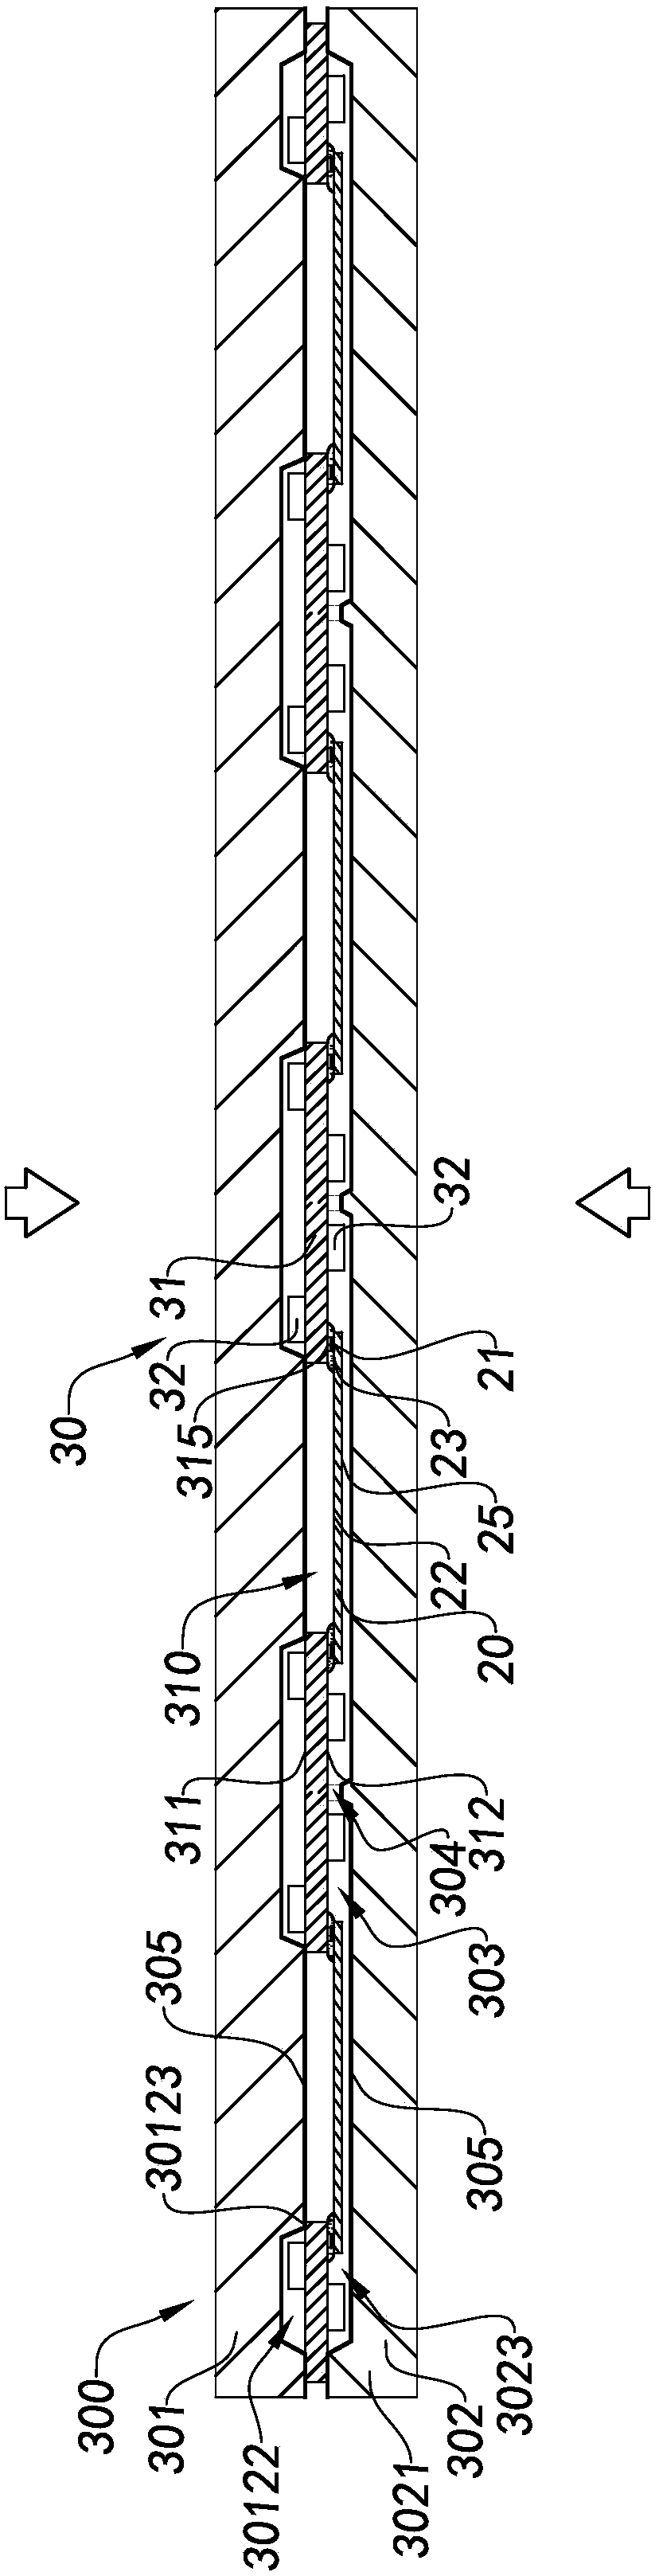 Image pick-up module set, molded circuit board assembly thereof, molded circuit board assembly semi-finished product, manufacturing method and electronic device